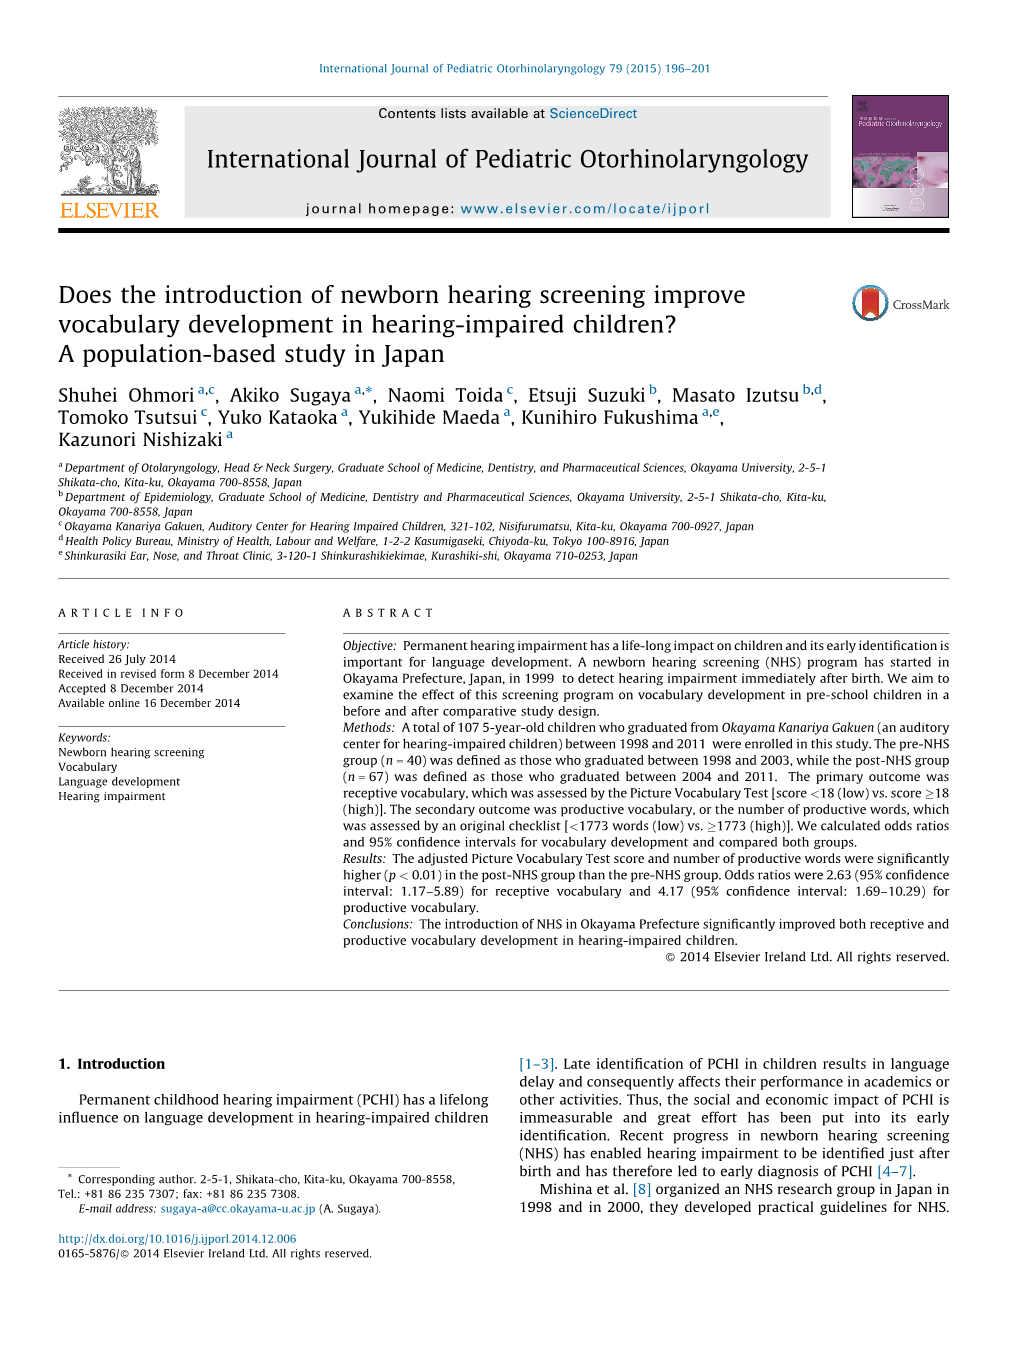 Does the Introduction of Newborn Hearing Screening Improve Vocabulary Development in Hearing-Impaired Children?